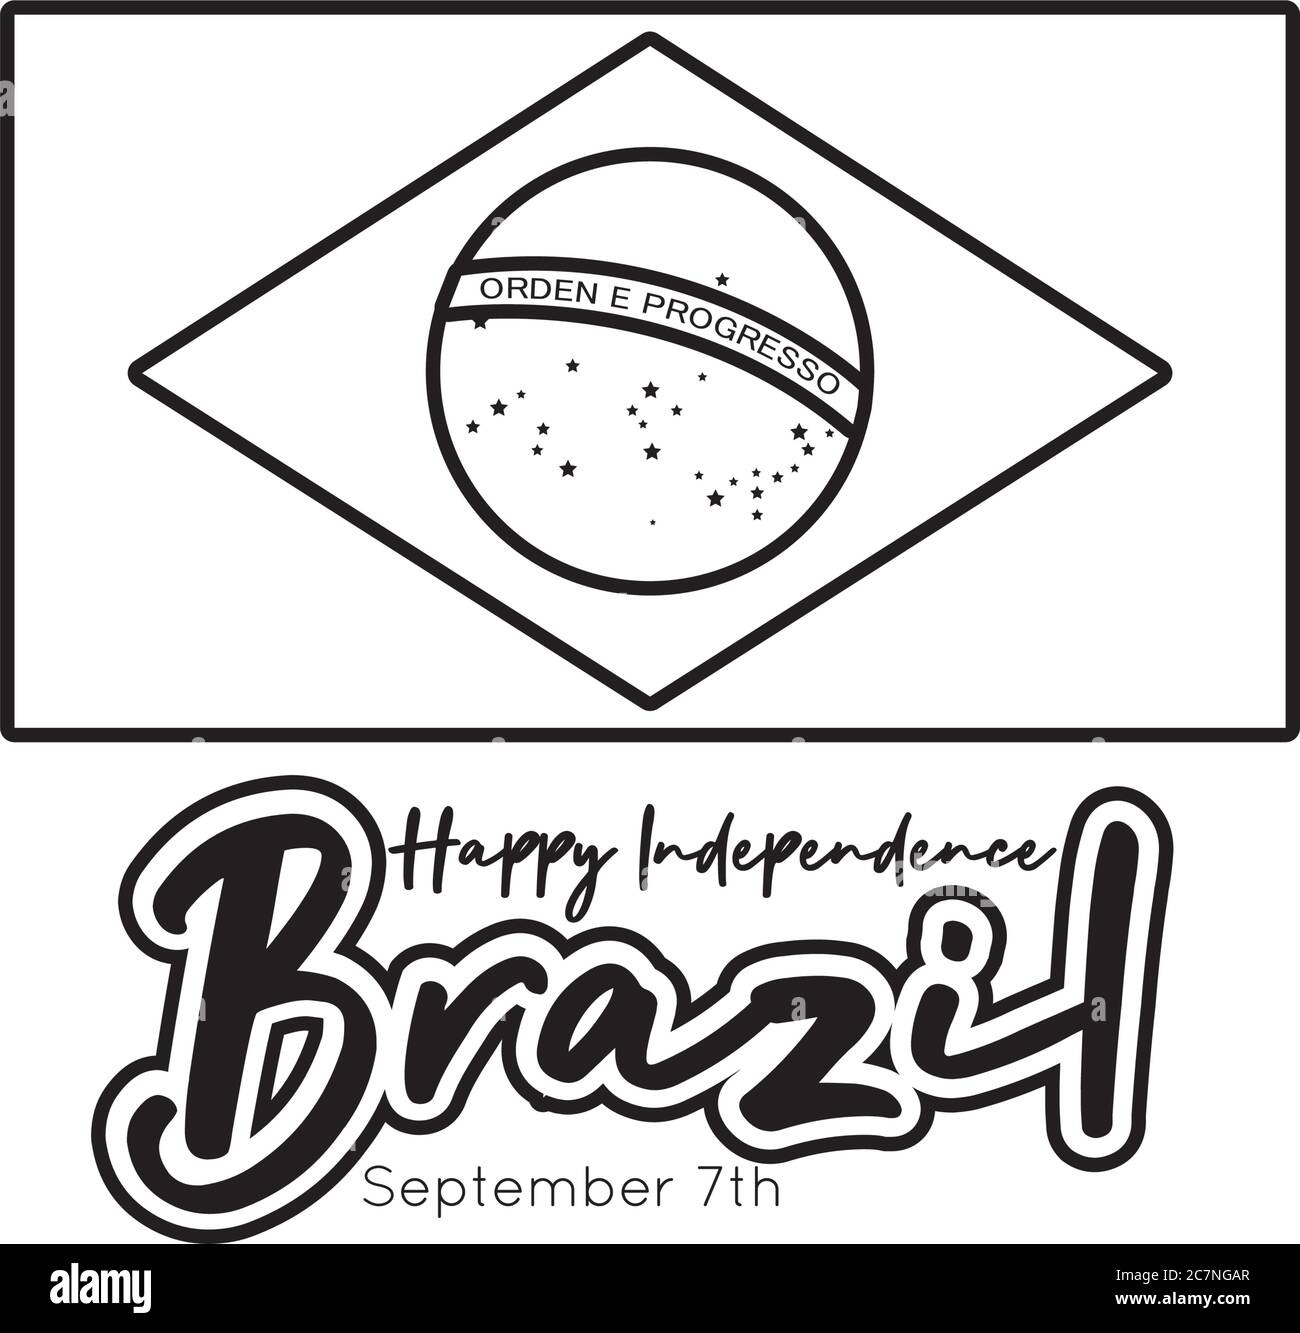 happy independence day brazil card with flag line style vector illustration design Stock Vector